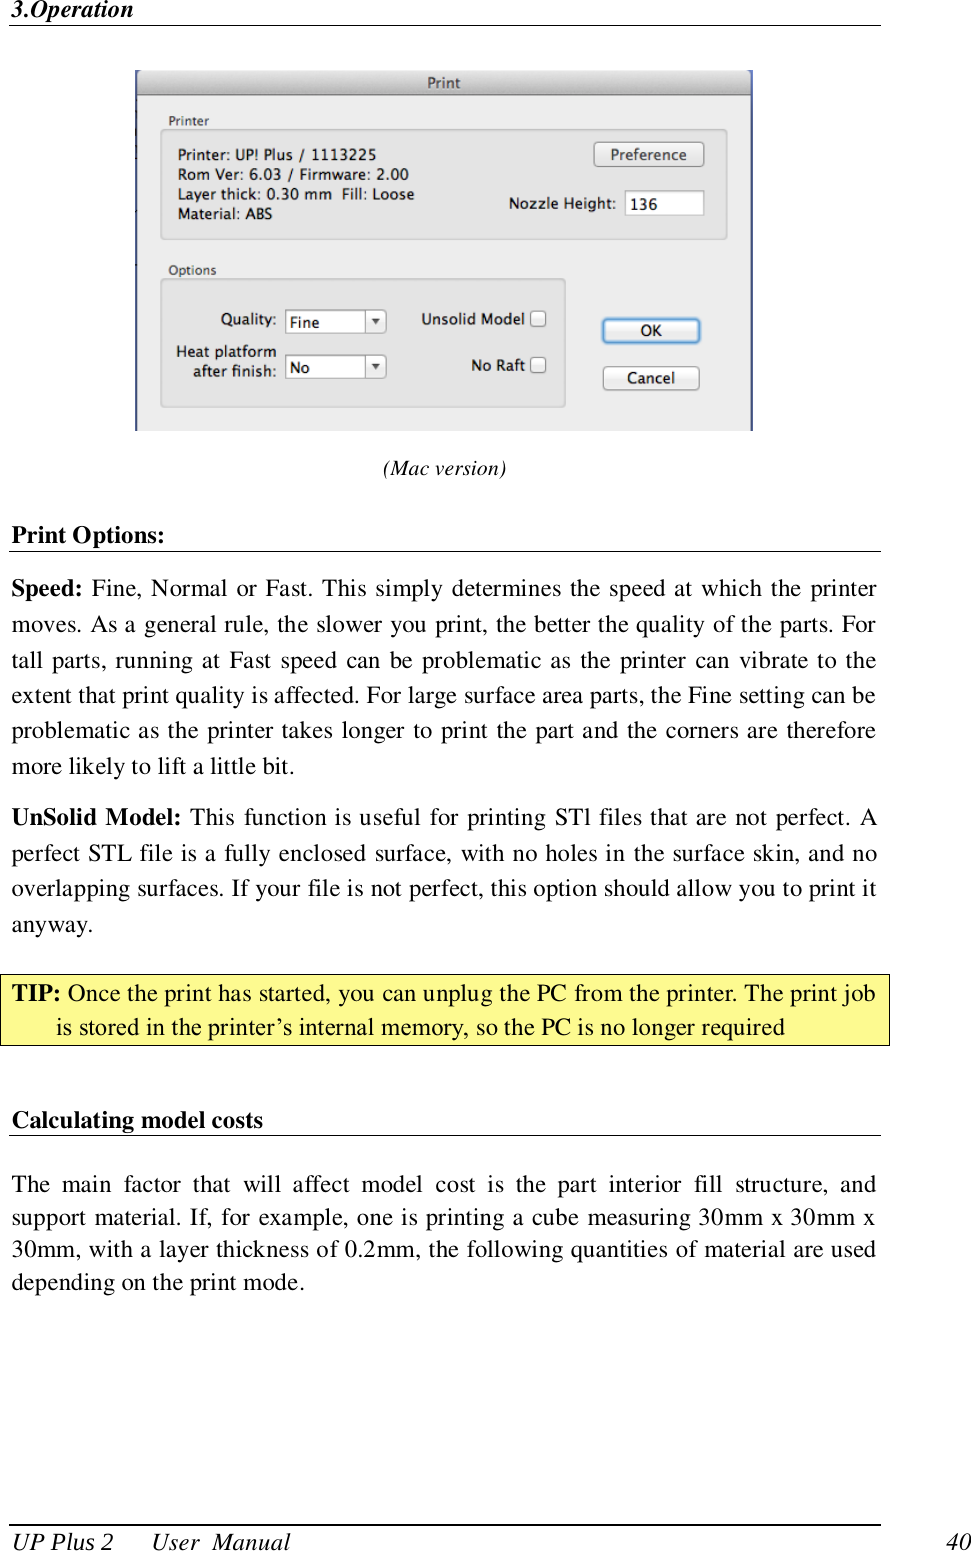 3.Operation UP Plus 2      User  Manual                                40  (Mac version) Print Options: Speed: Fine, Normal or Fast. This simply determines the speed at which the printer moves. As a general rule, the slower you print, the better the quality of the parts. For tall parts, running at  Fast speed  can be problematic as the  printer can vibrate to the extent that print quality is affected. For large surface area parts, the Fine setting can be problematic as the printer takes longer to print the part and the corners are therefore more likely to lift a little bit. UnSolid Model: This function is useful for printing STl files that are not perfect. A perfect STL file is a fully enclosed surface, with no holes in the surface skin, and no overlapping surfaces. If your file is not perfect, this option should allow you to print it anyway.  TIP: Once the print has started, you can unplug the PC from the printer. The print job is stored in the printer‘s internal memory, so the PC is no longer required  Calculating model costs  The  main  factor  that  will  affect  model  cost  is  the  part  interior  fill  structure,  and support material. If, for example, one is printing a cube measuring 30mm x 30mm x 30mm, with a layer thickness of 0.2mm, the following quantities of material are used depending on the print mode.   